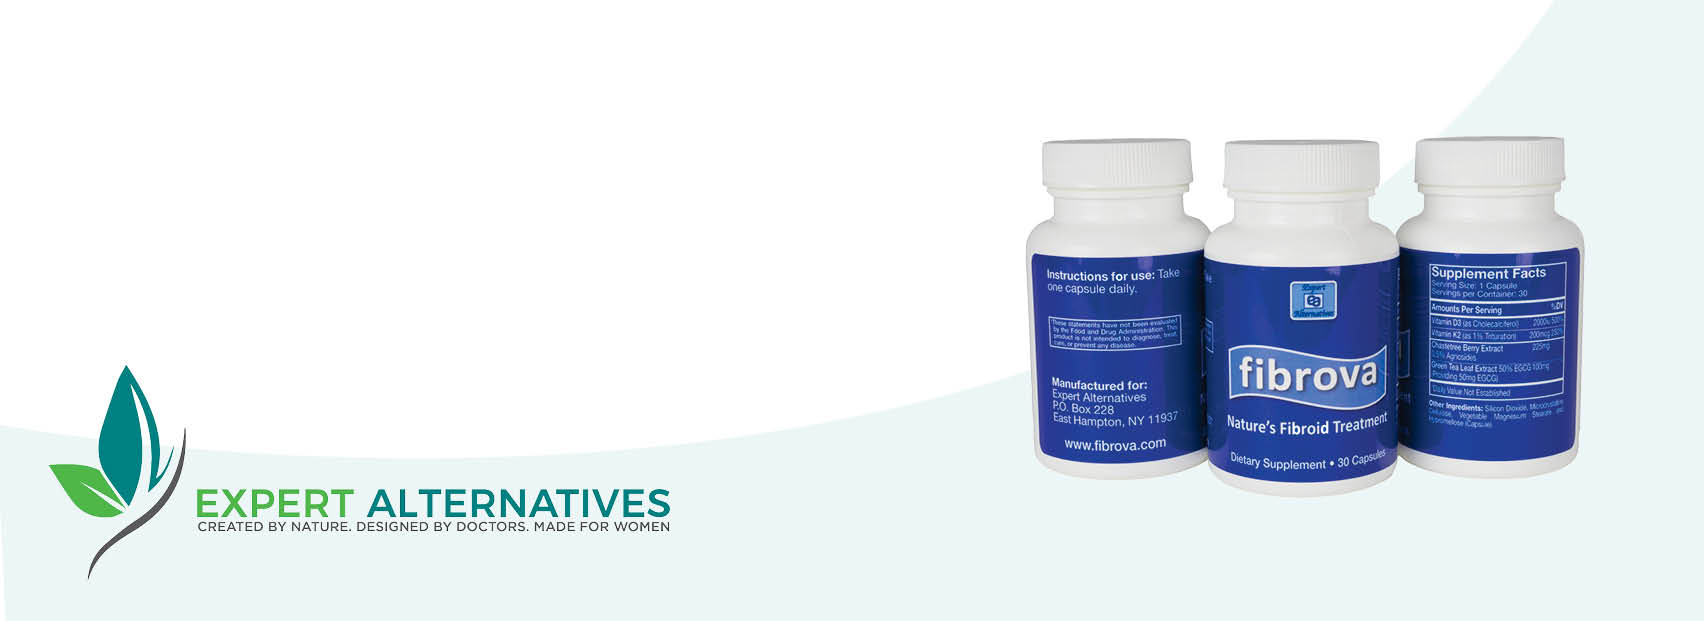 EXPERT ALTERNATIVES LAUNCHES FIRST SUPPLEMENT FIBROVA, DESIGNED BY DOCTORS TO HELP WOMEN REDUCE AND PREVENT FIBROID TUMORS